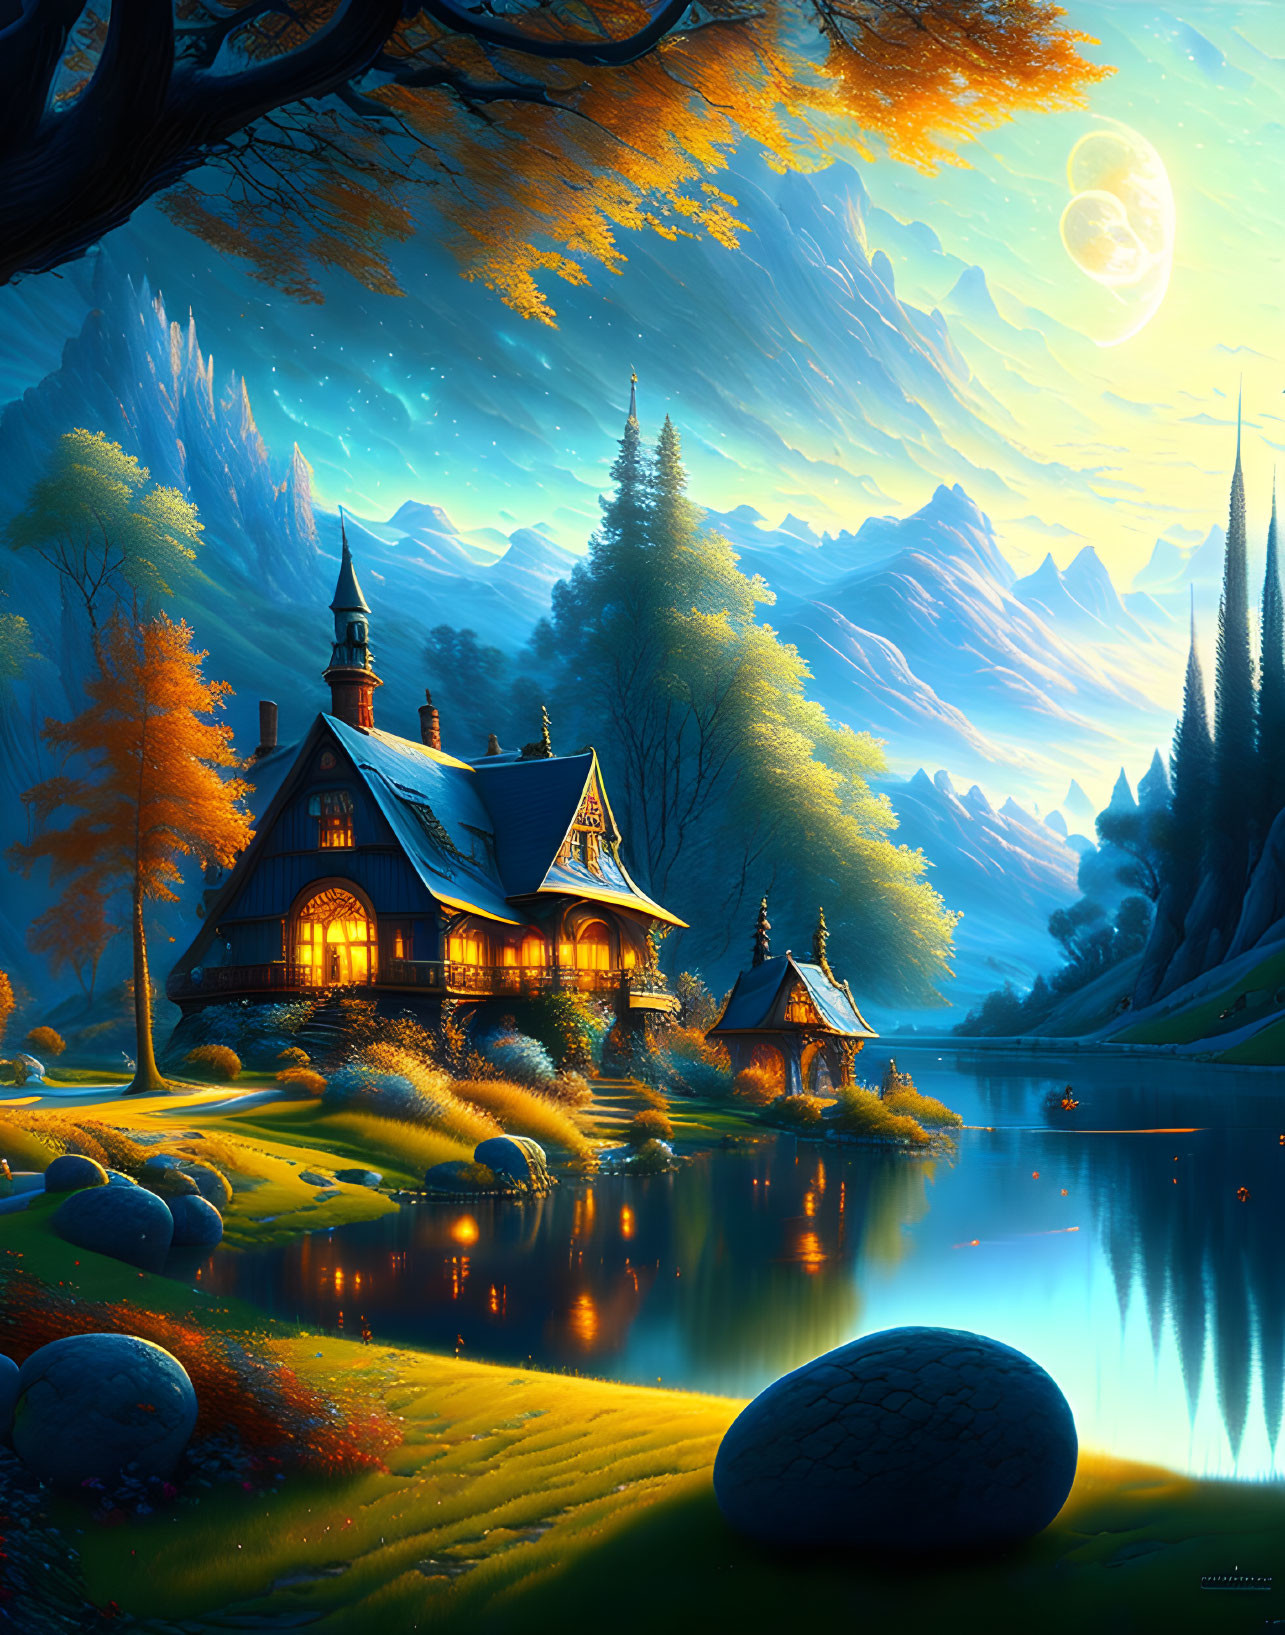 Fantasy art of illuminated cottage by tranquil lake at night